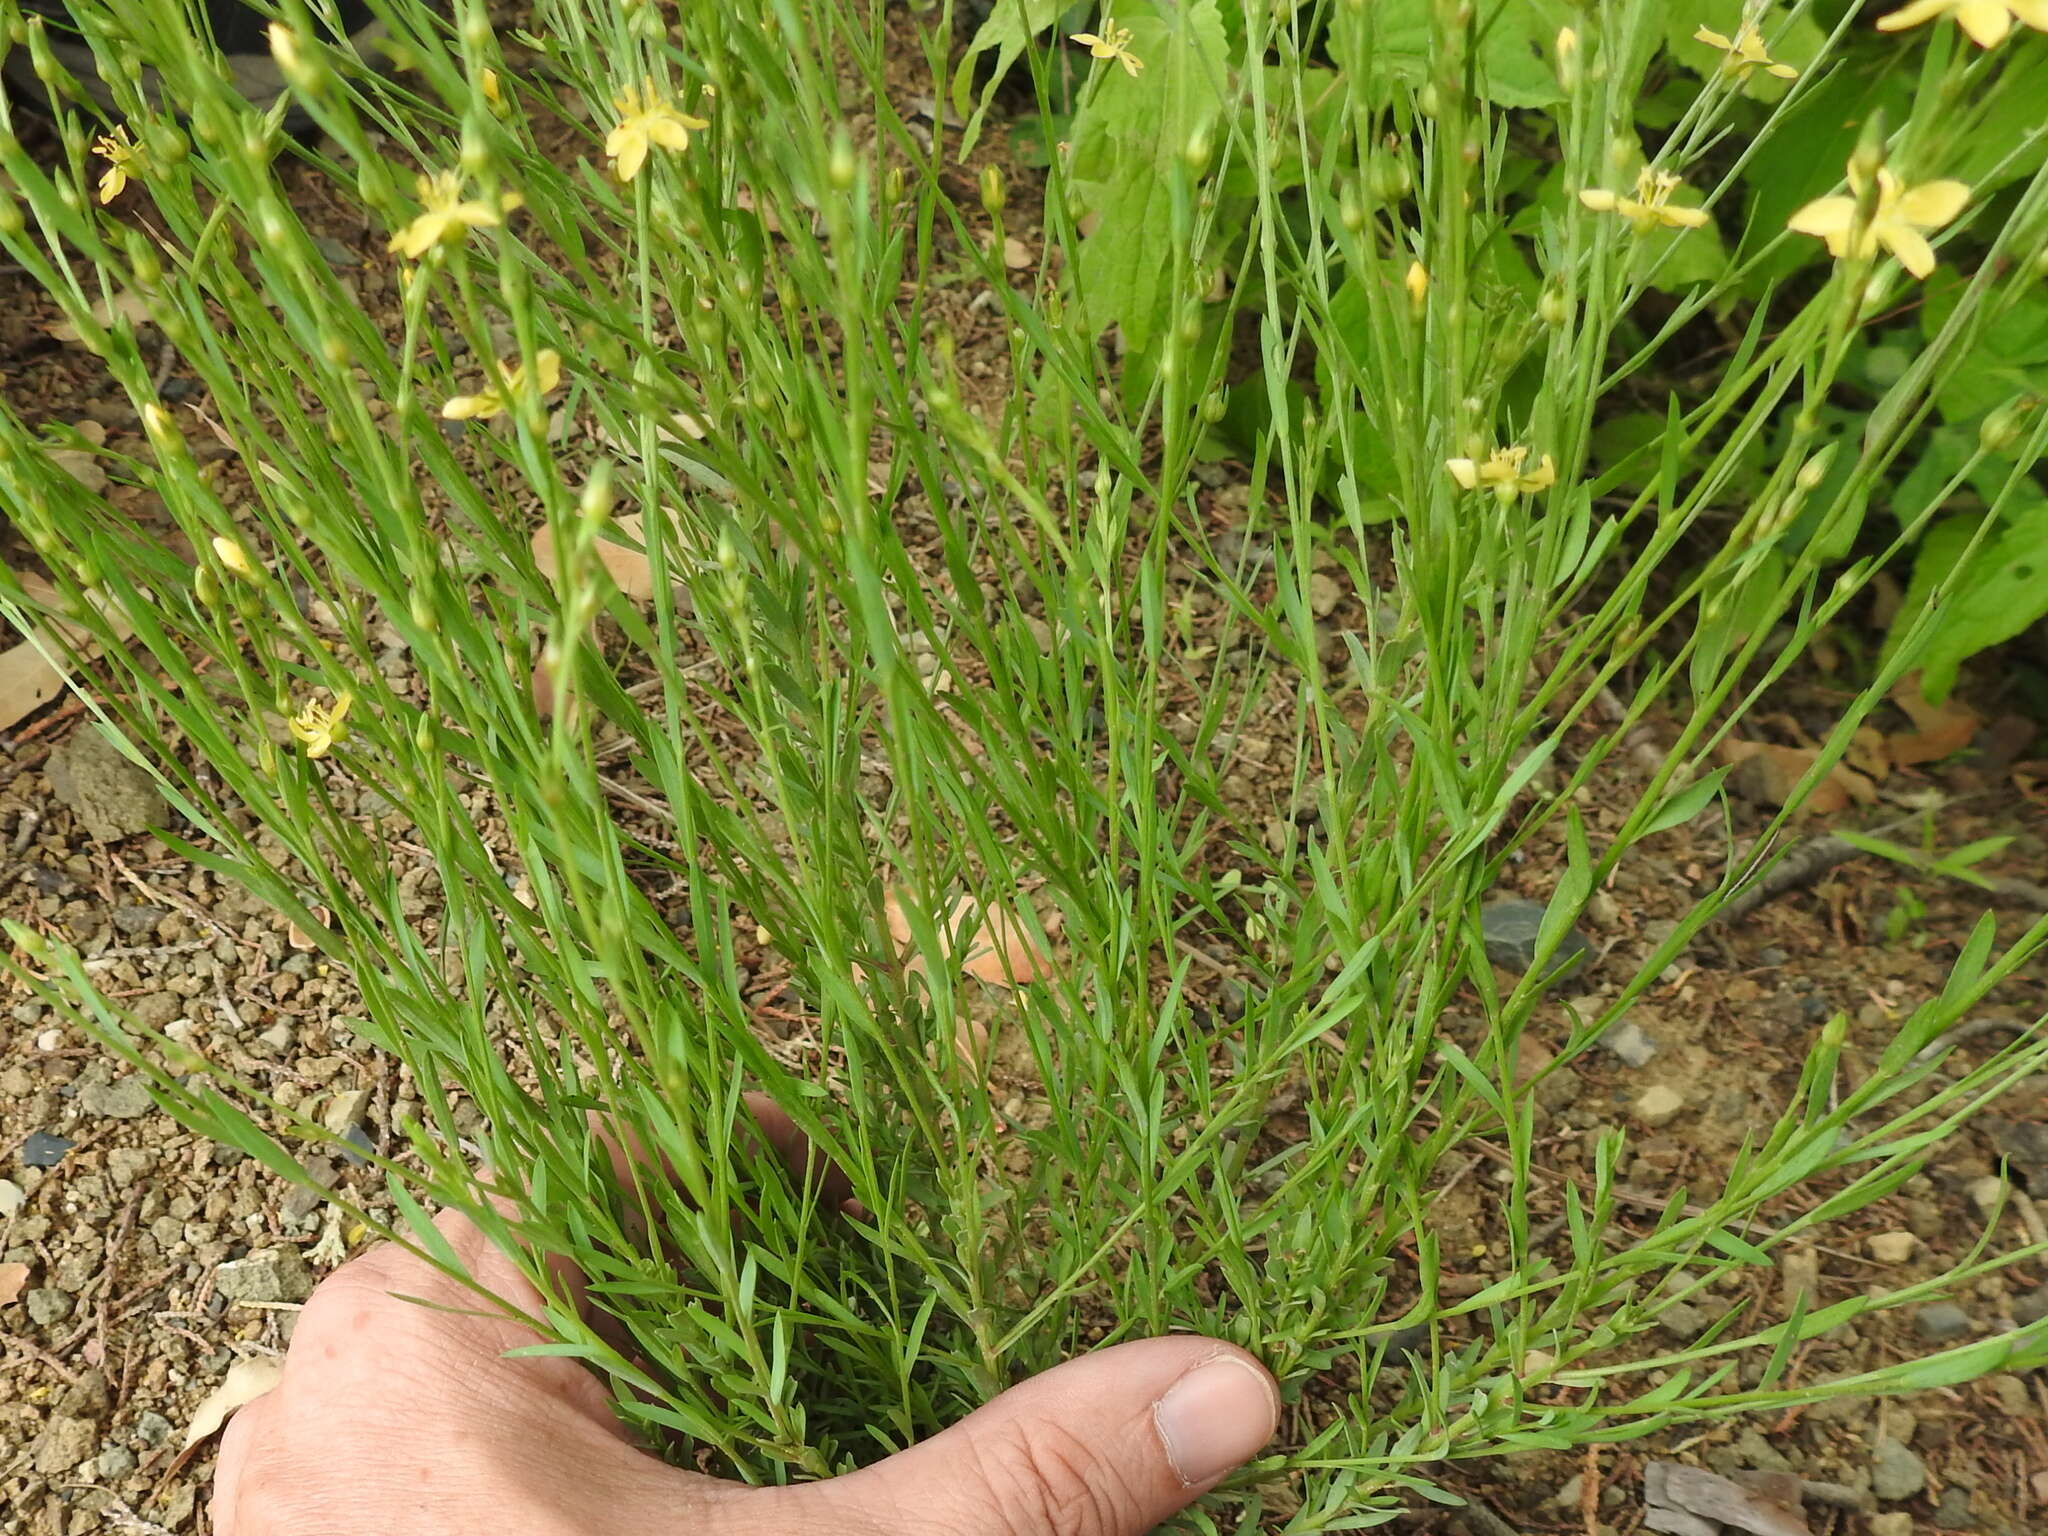 Image of New Mexico yellow flax